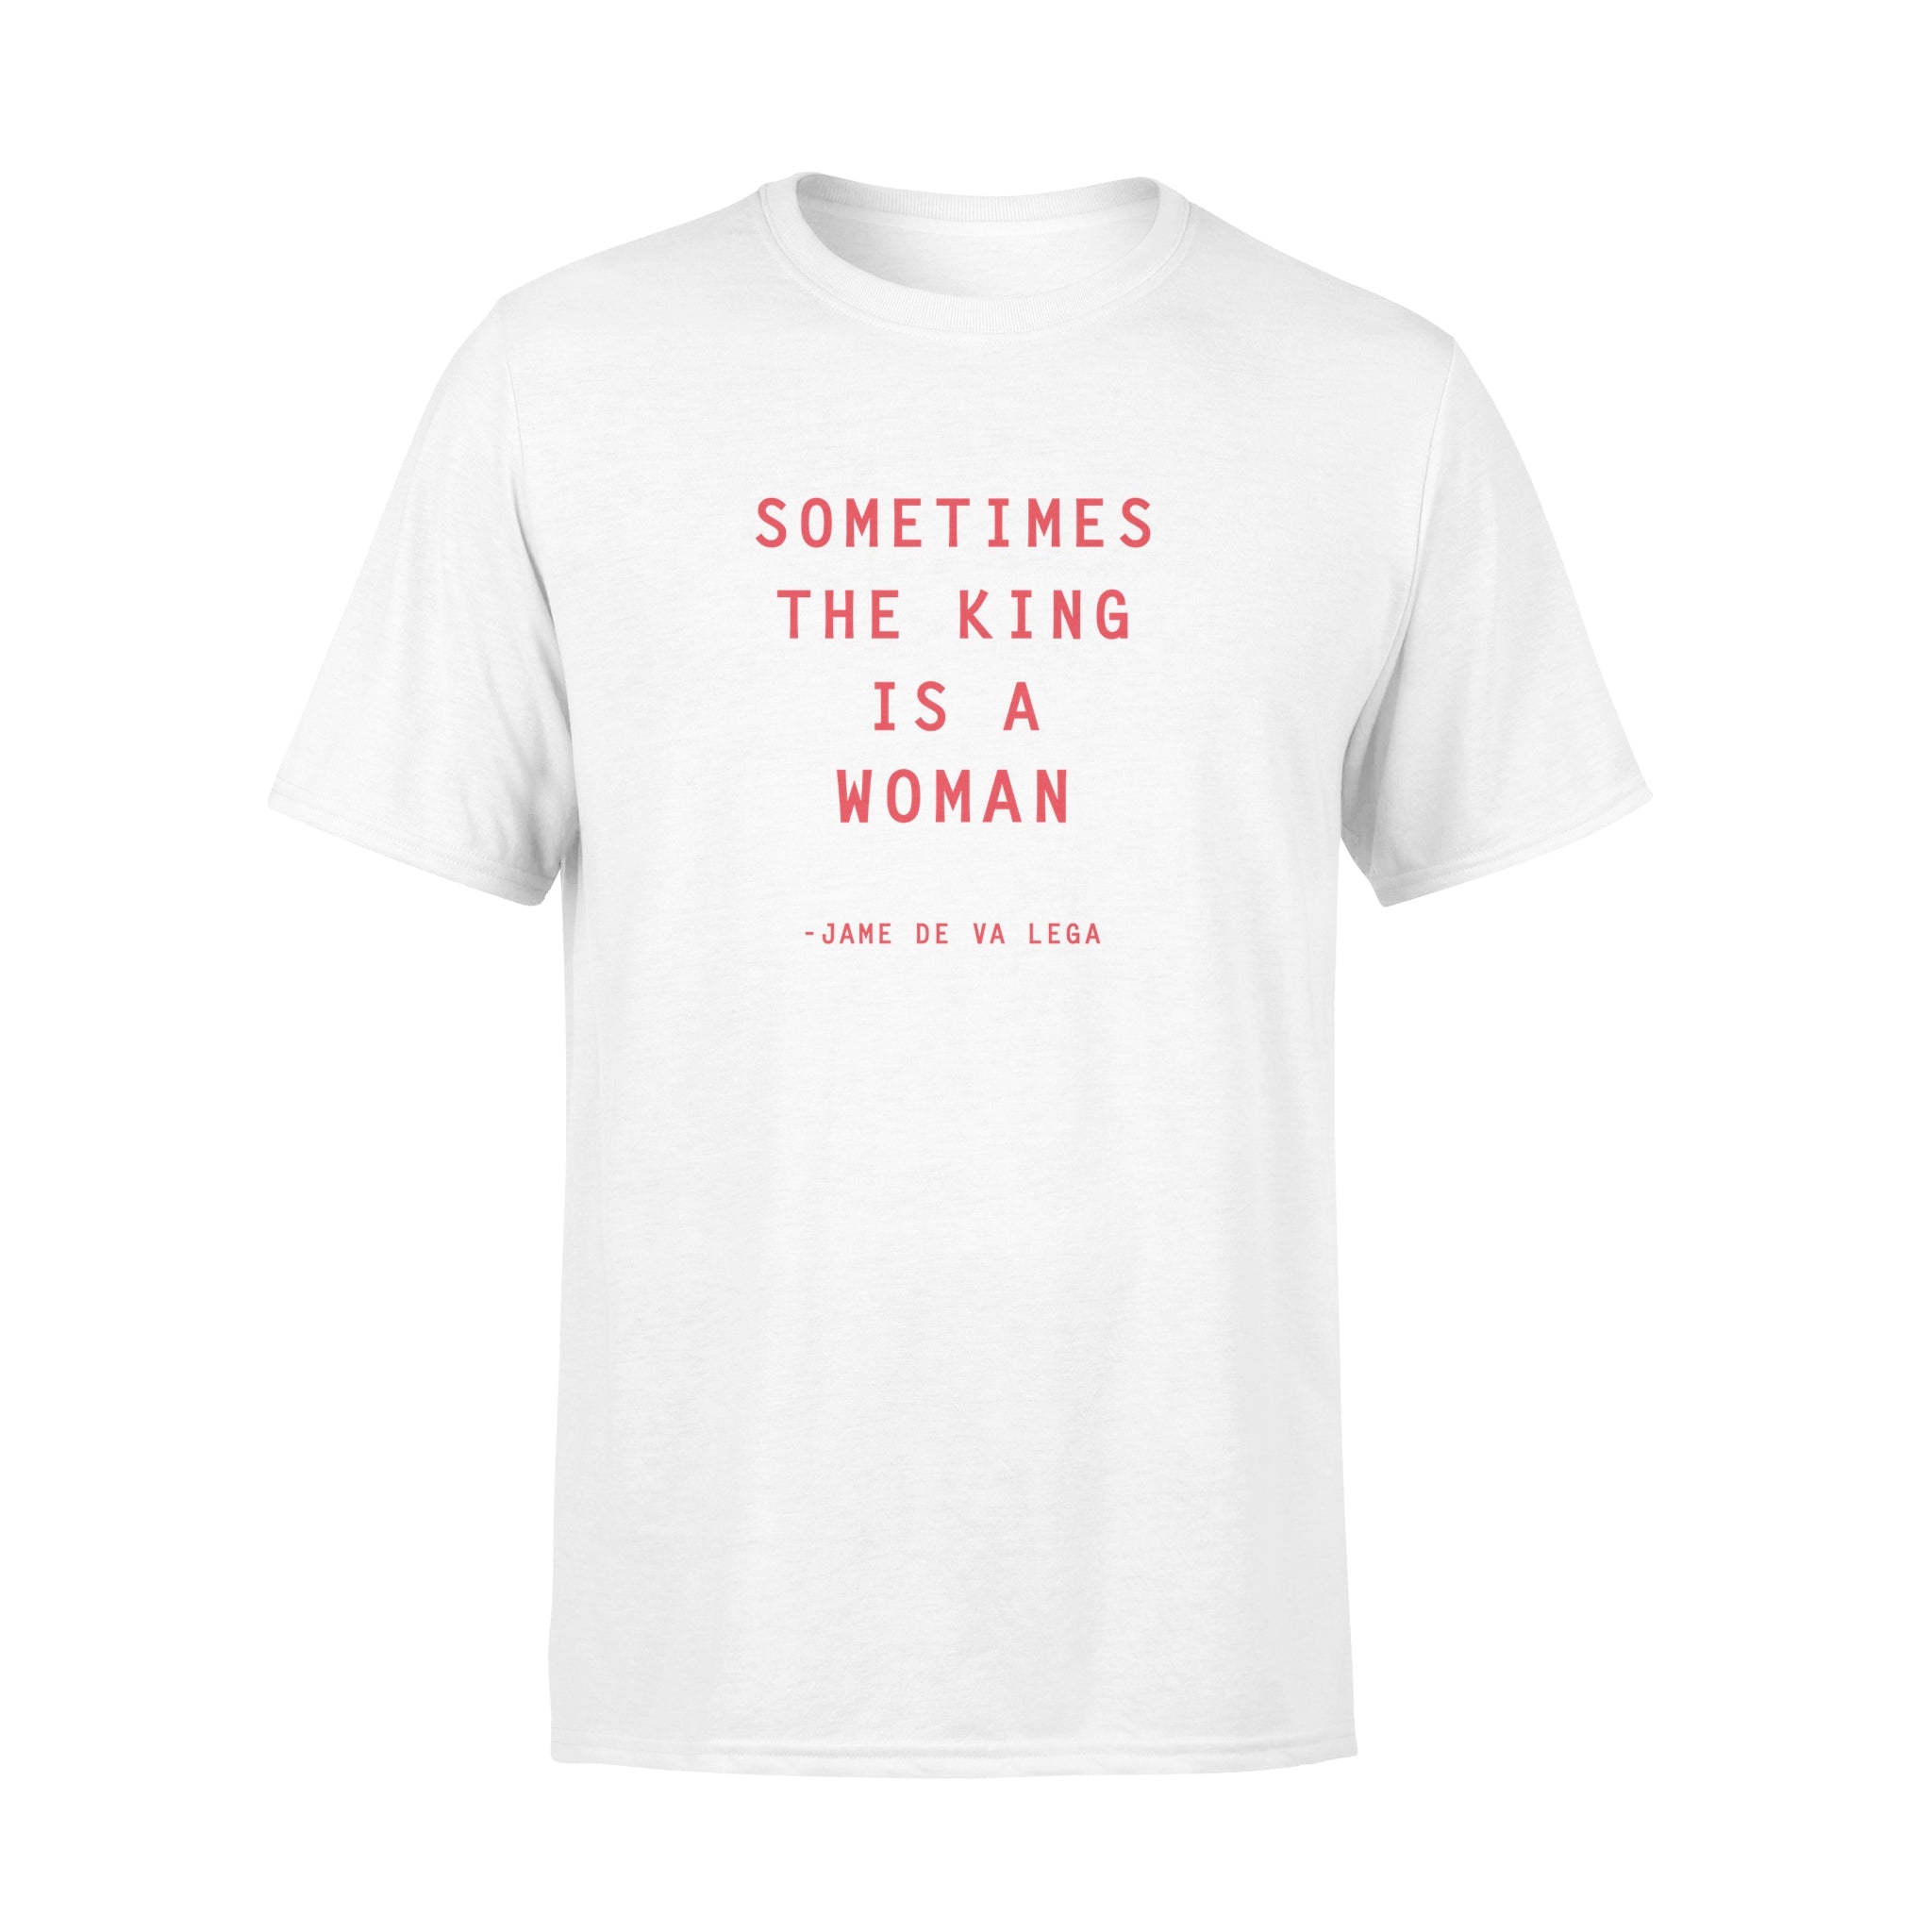 Sometimes The King Is A Woman - T-shirt